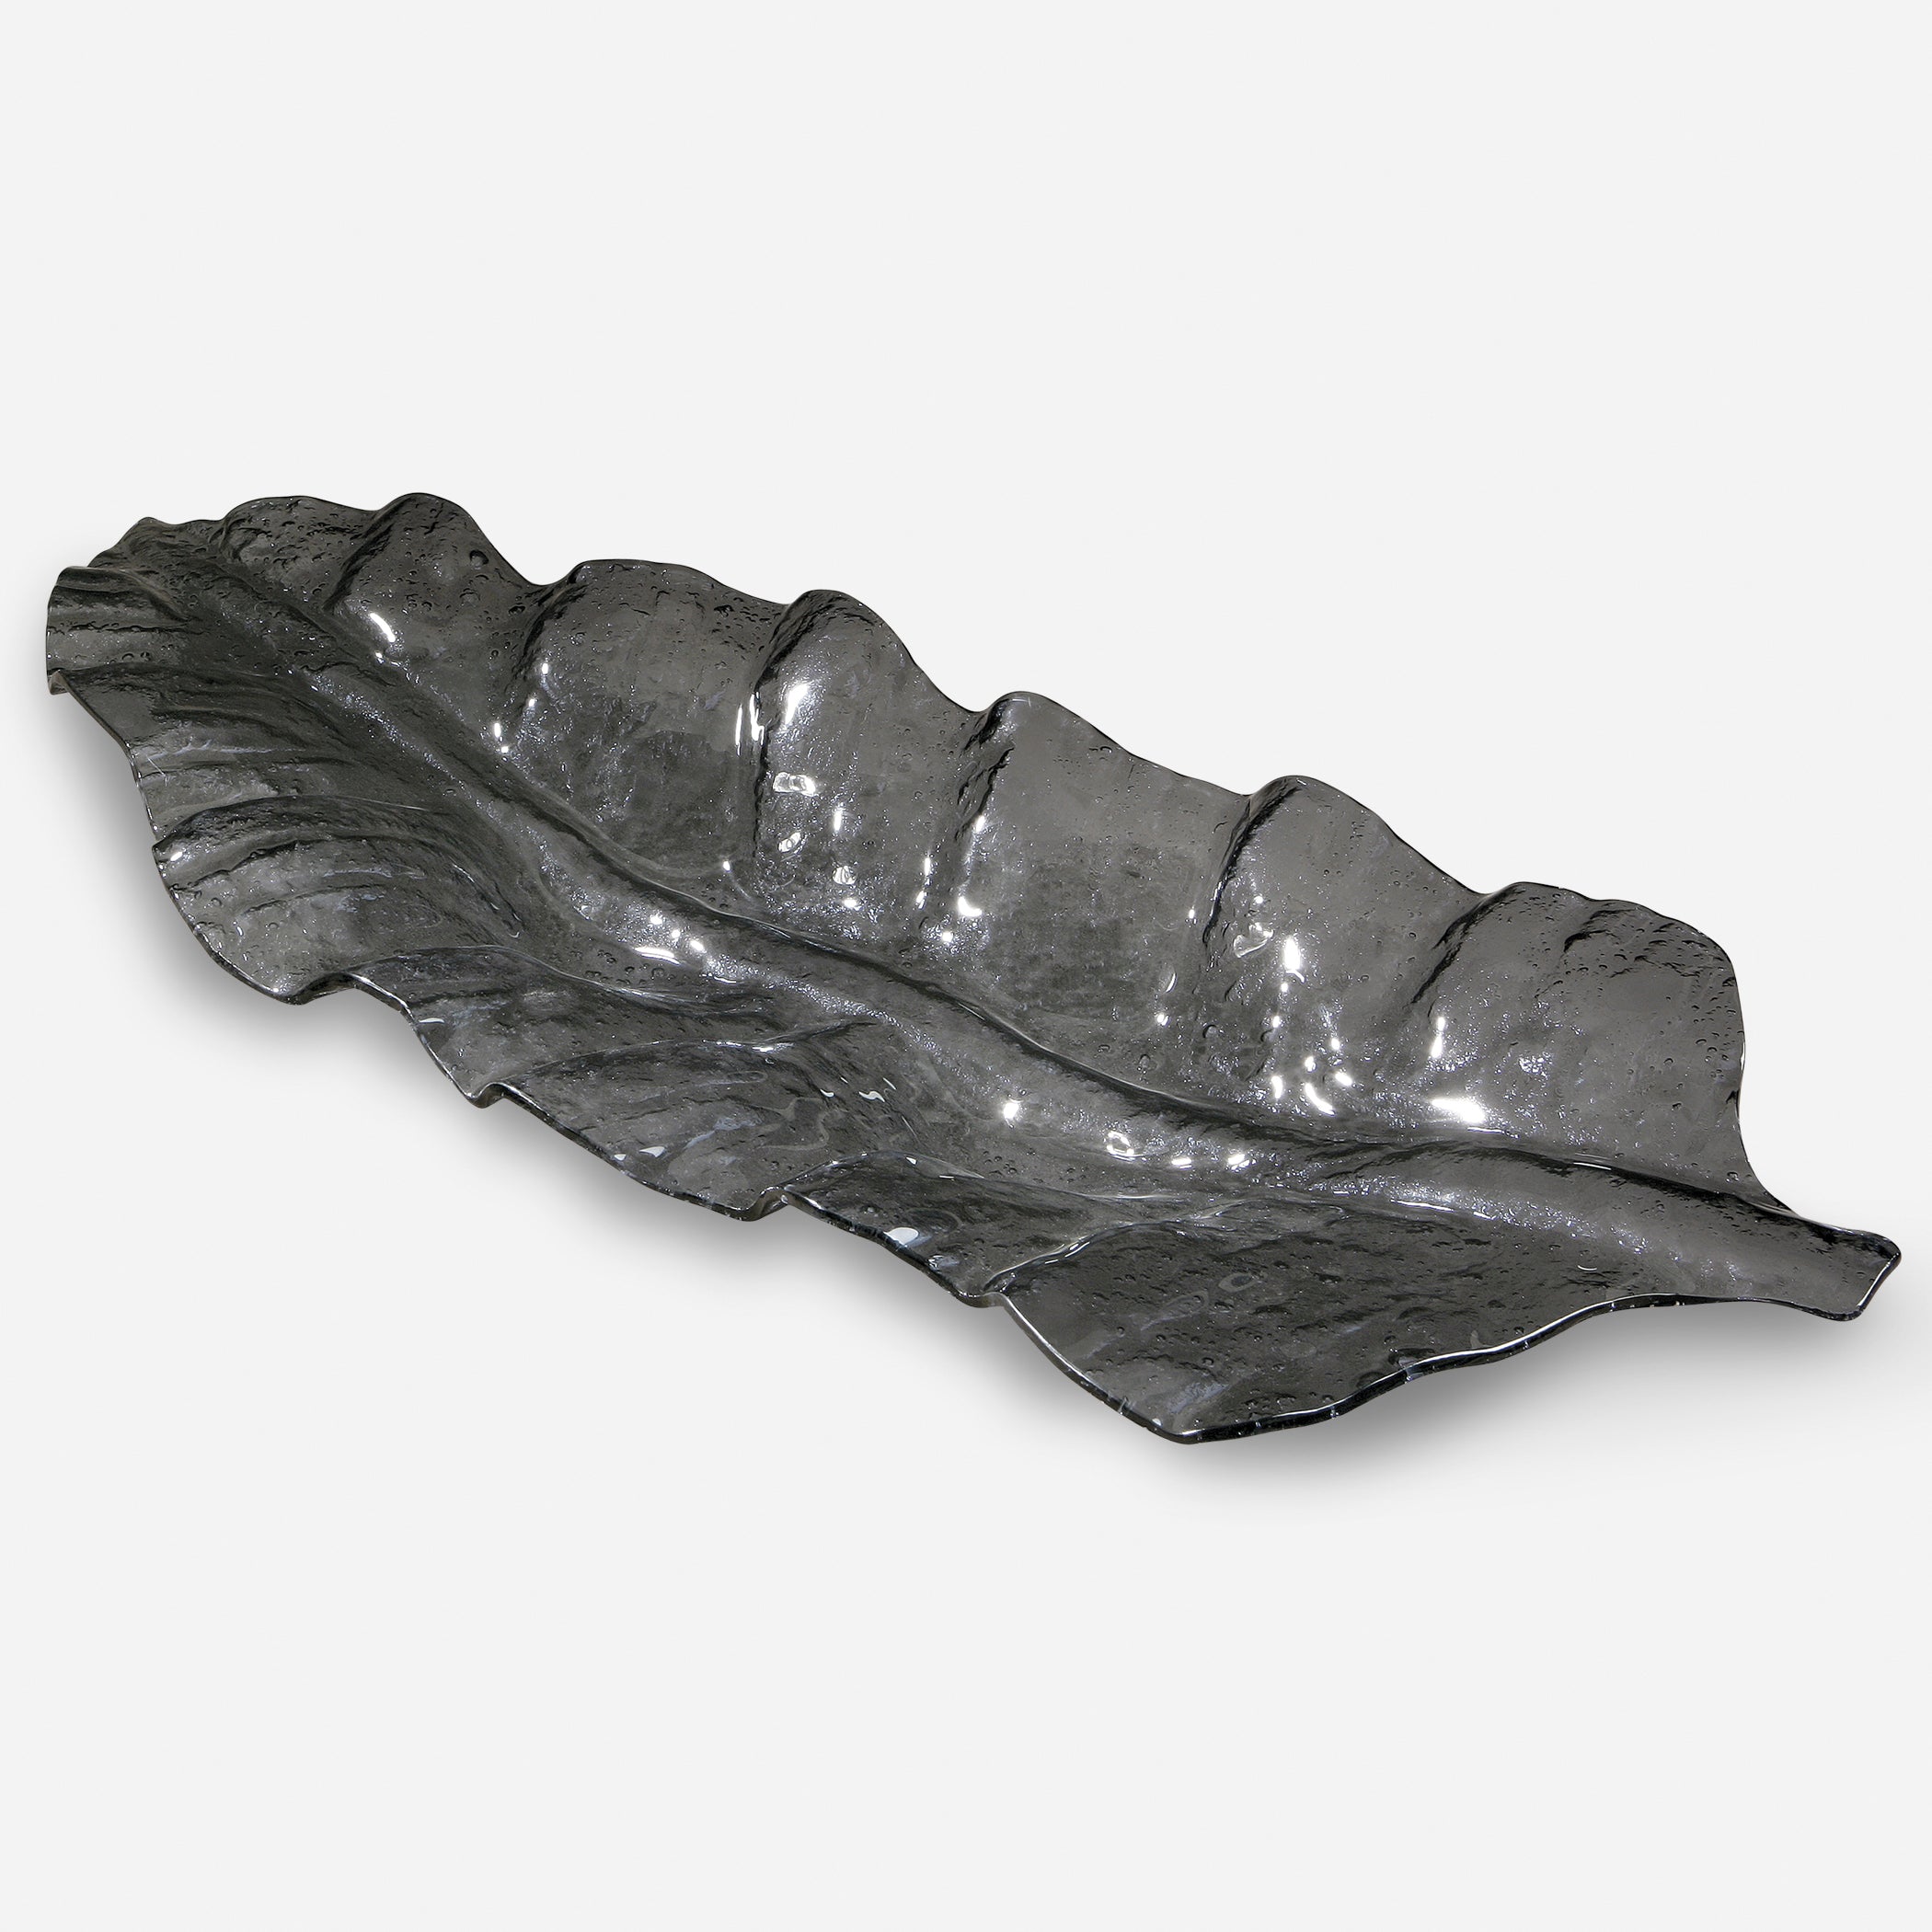 Uttermost Smoked Leaf Decorative Bowls & Trays Decorative Bowls & Trays Uttermost   